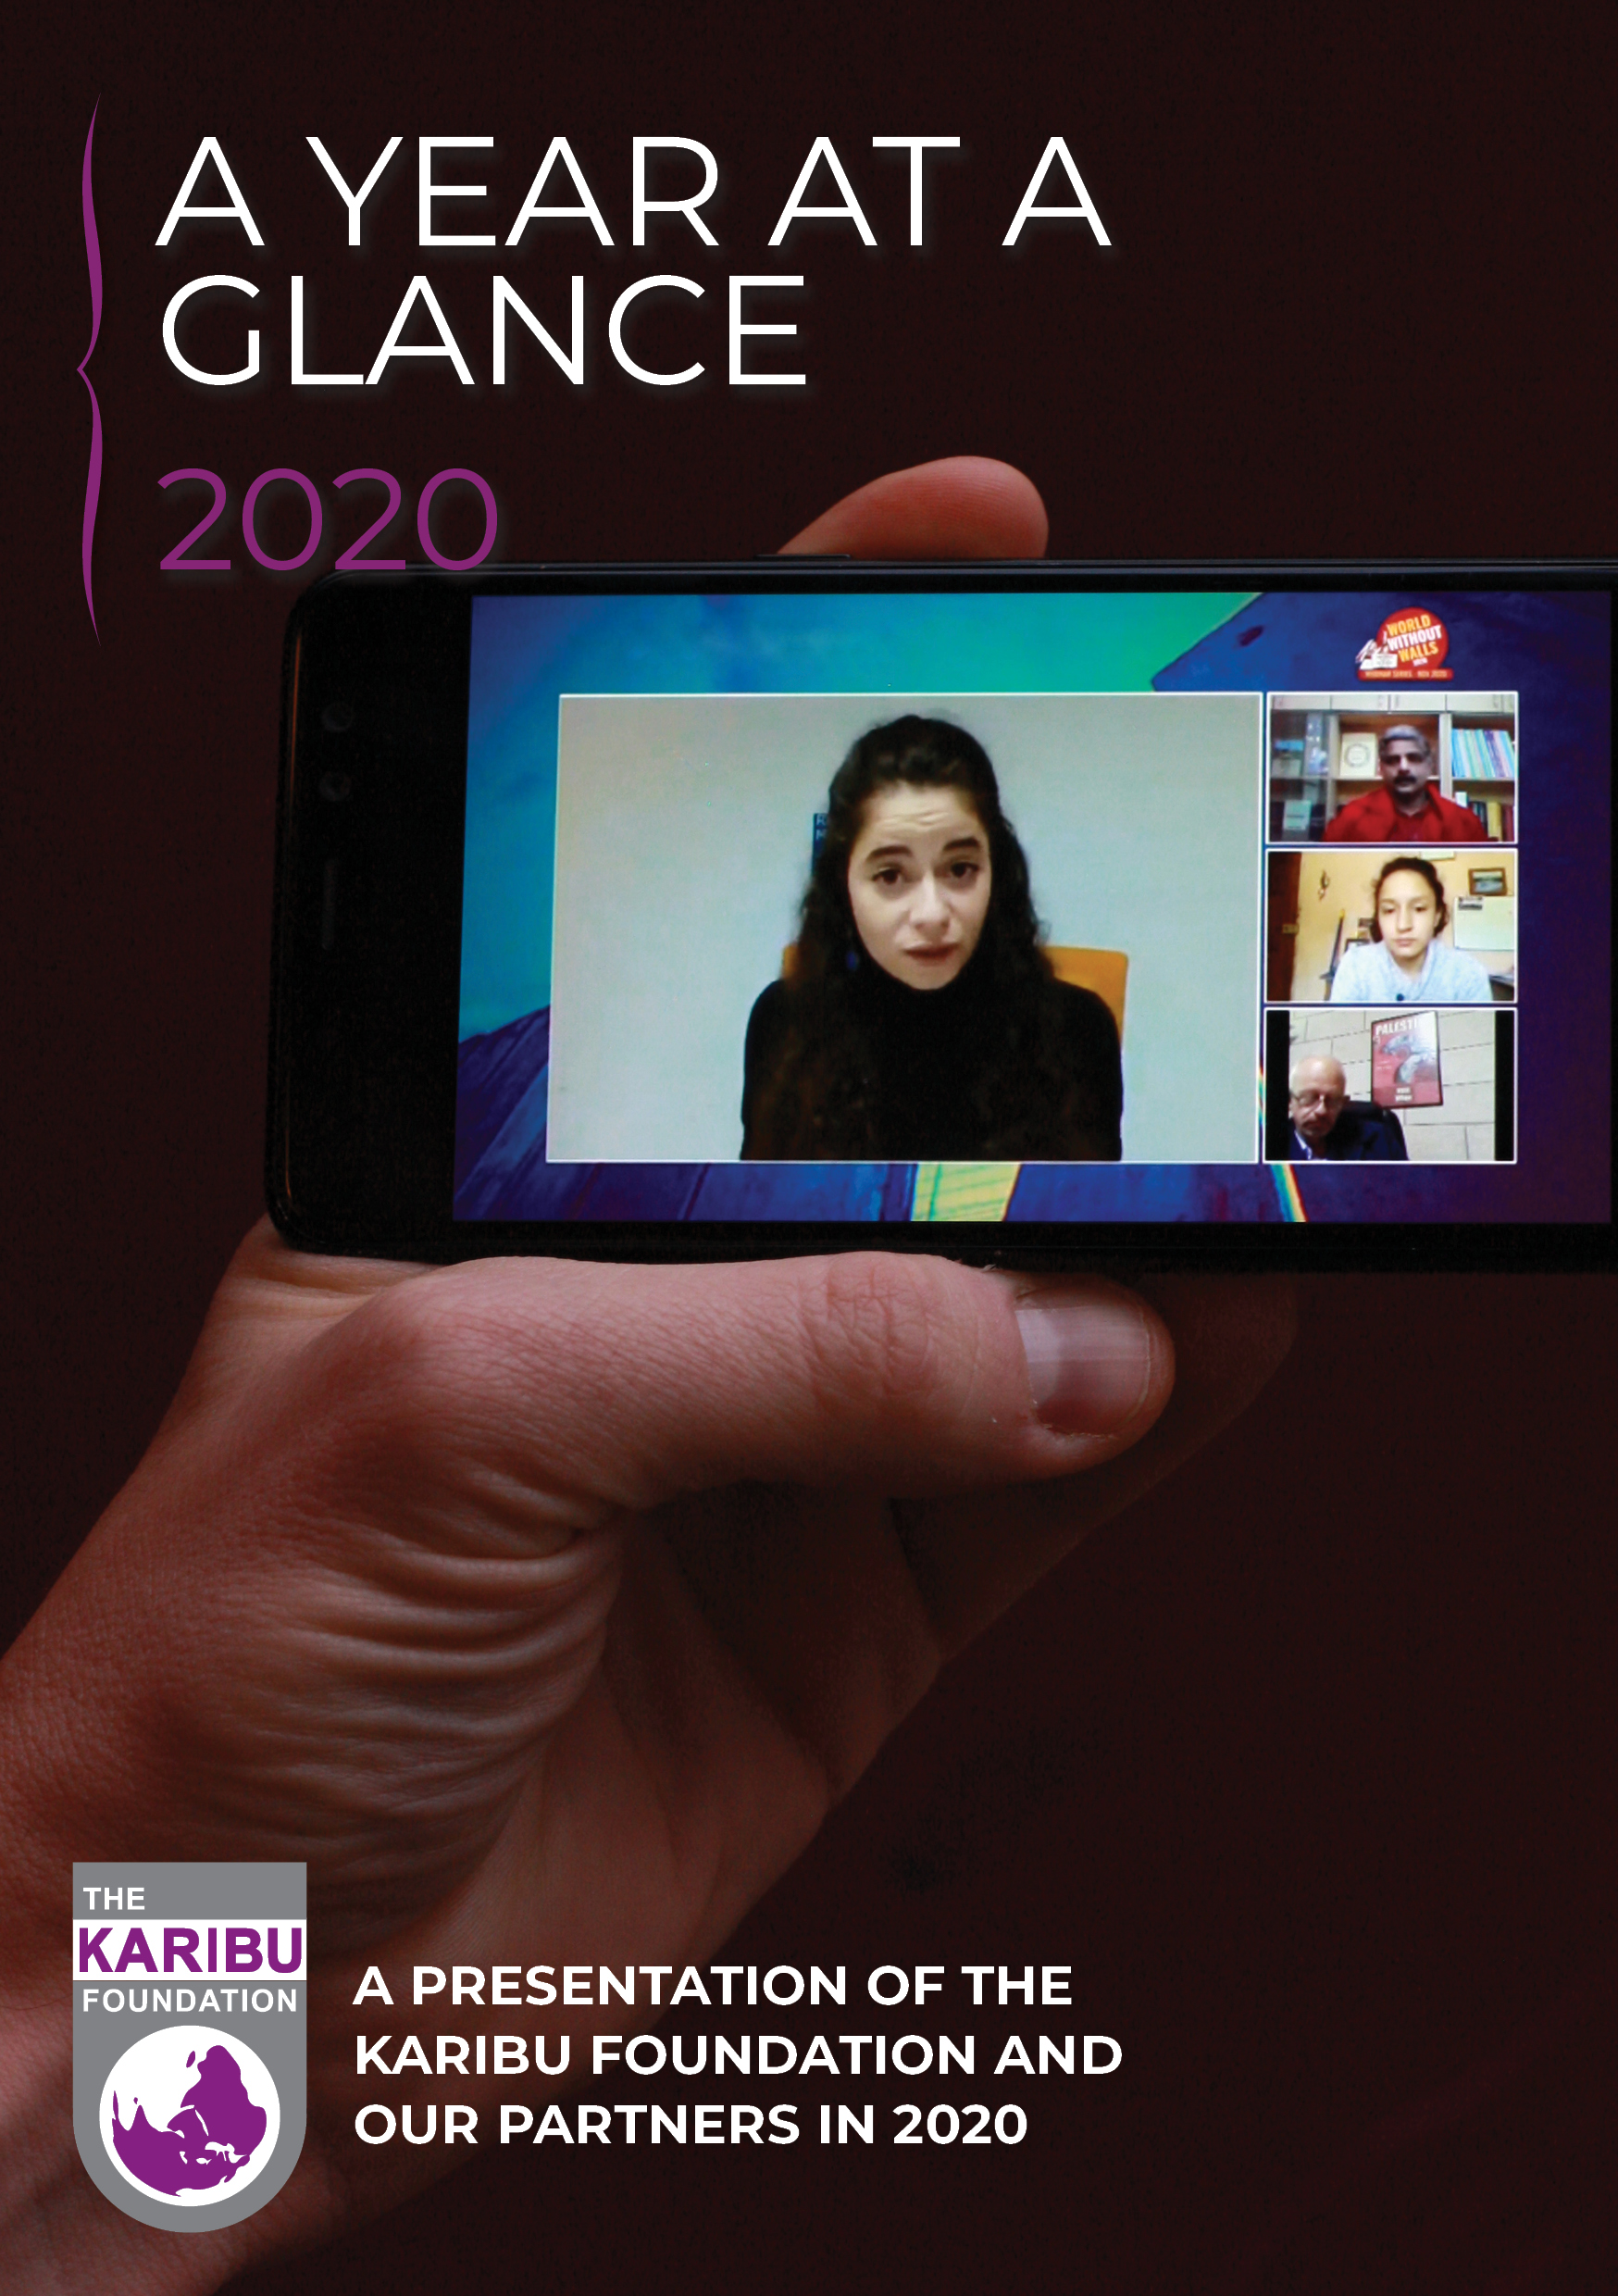 2020 Year at a Glance COVER